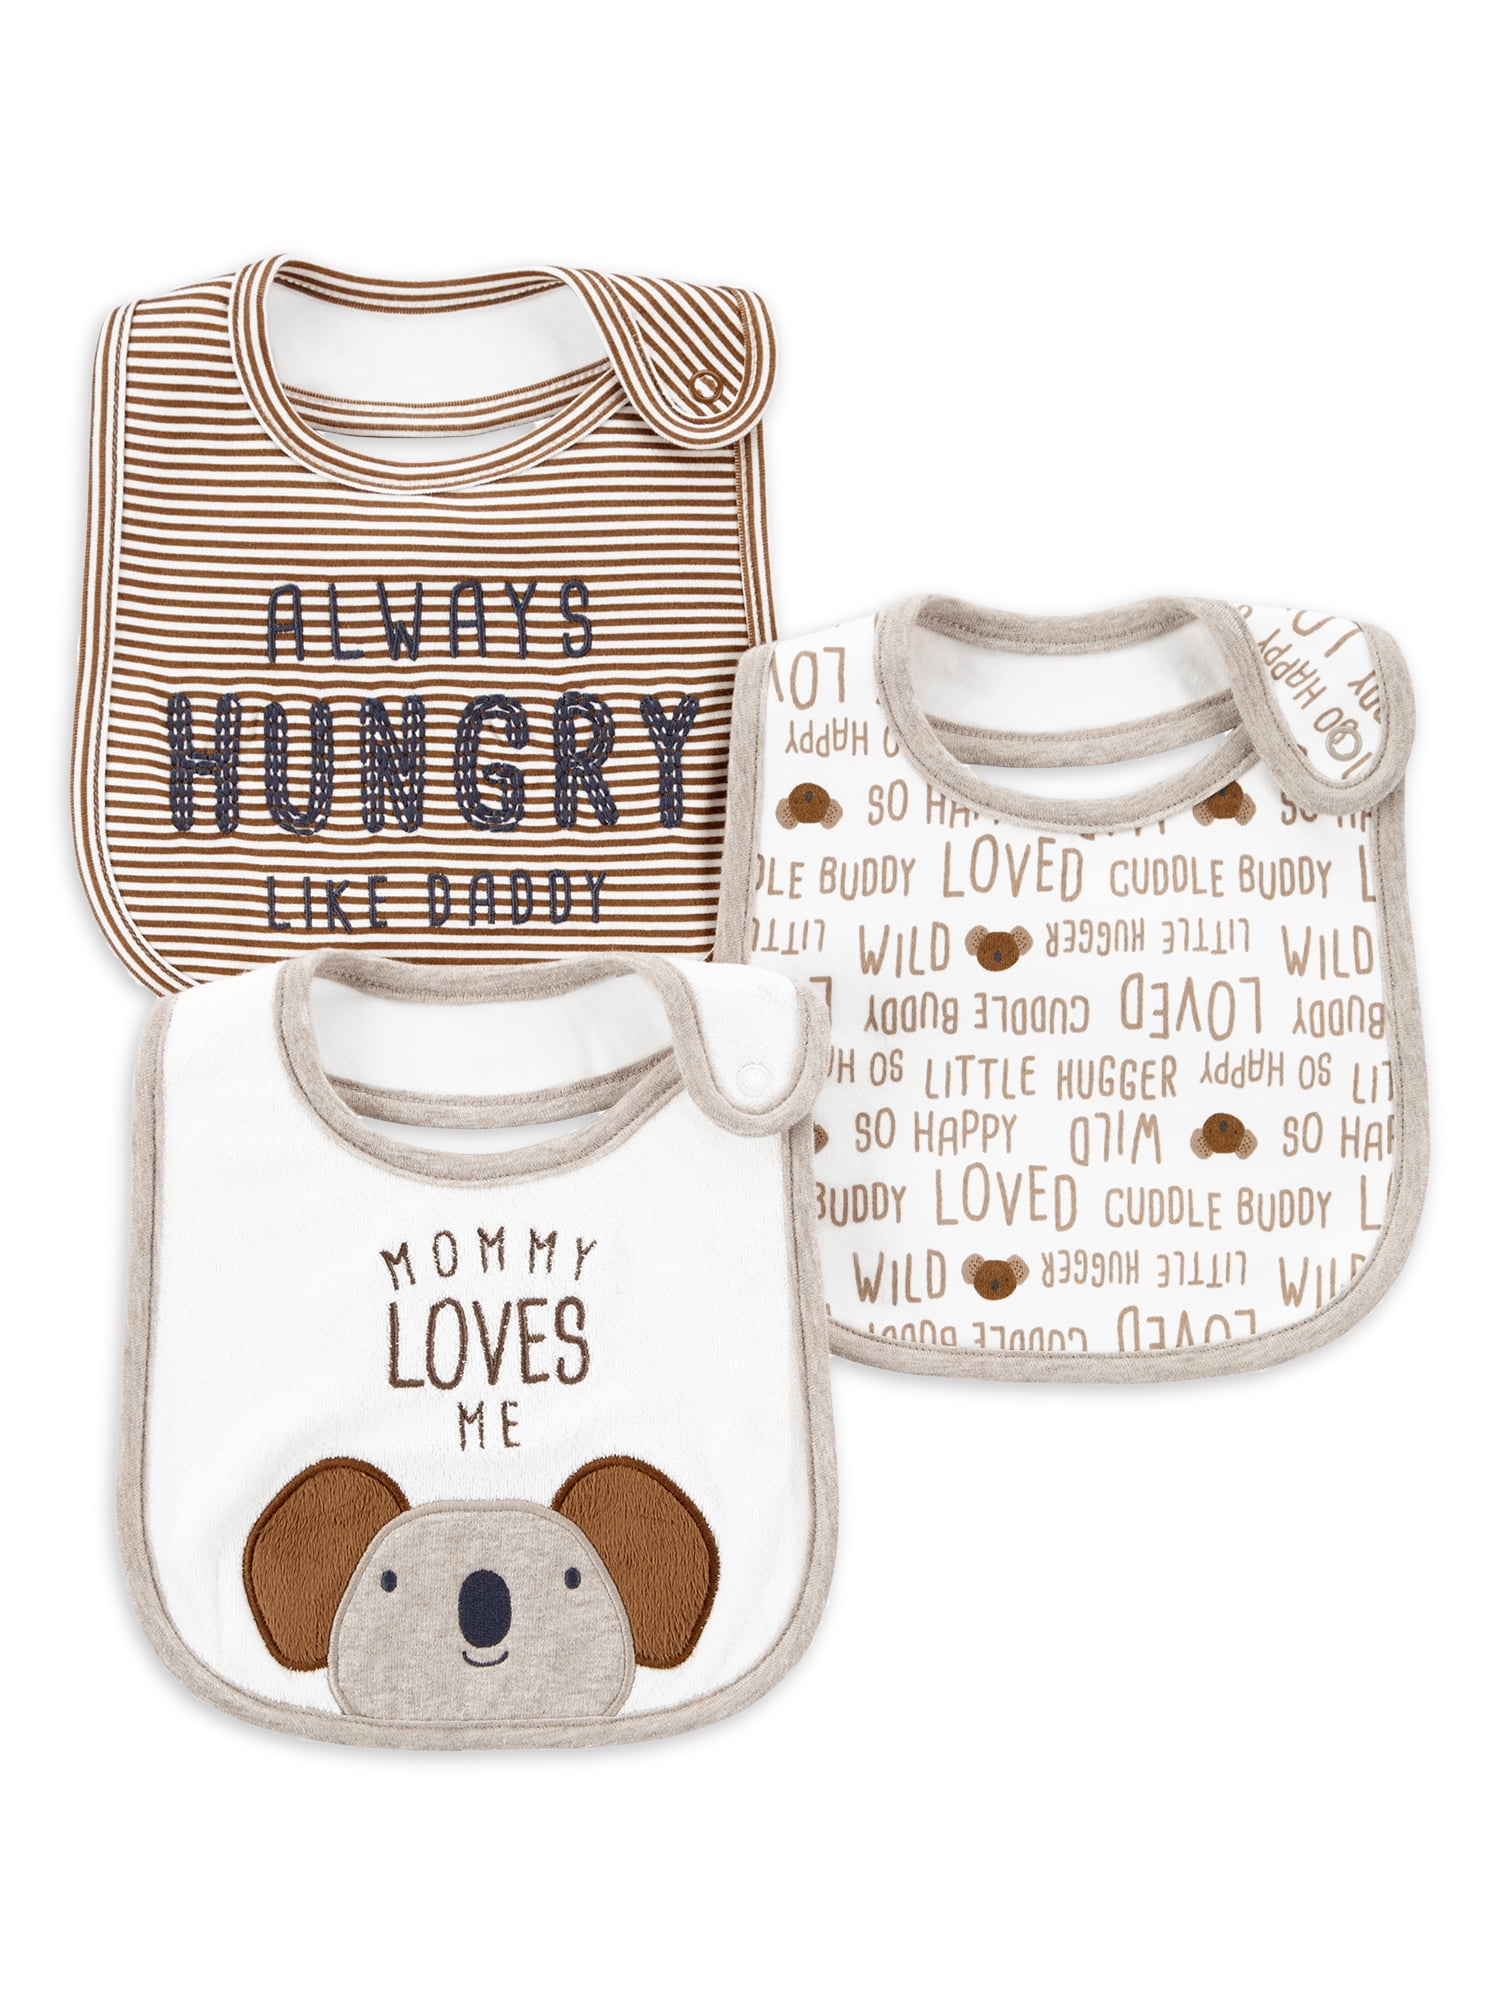 I Love Mummy This Much New Funny Personalised Soft Cotton Baby Bib Unisex 